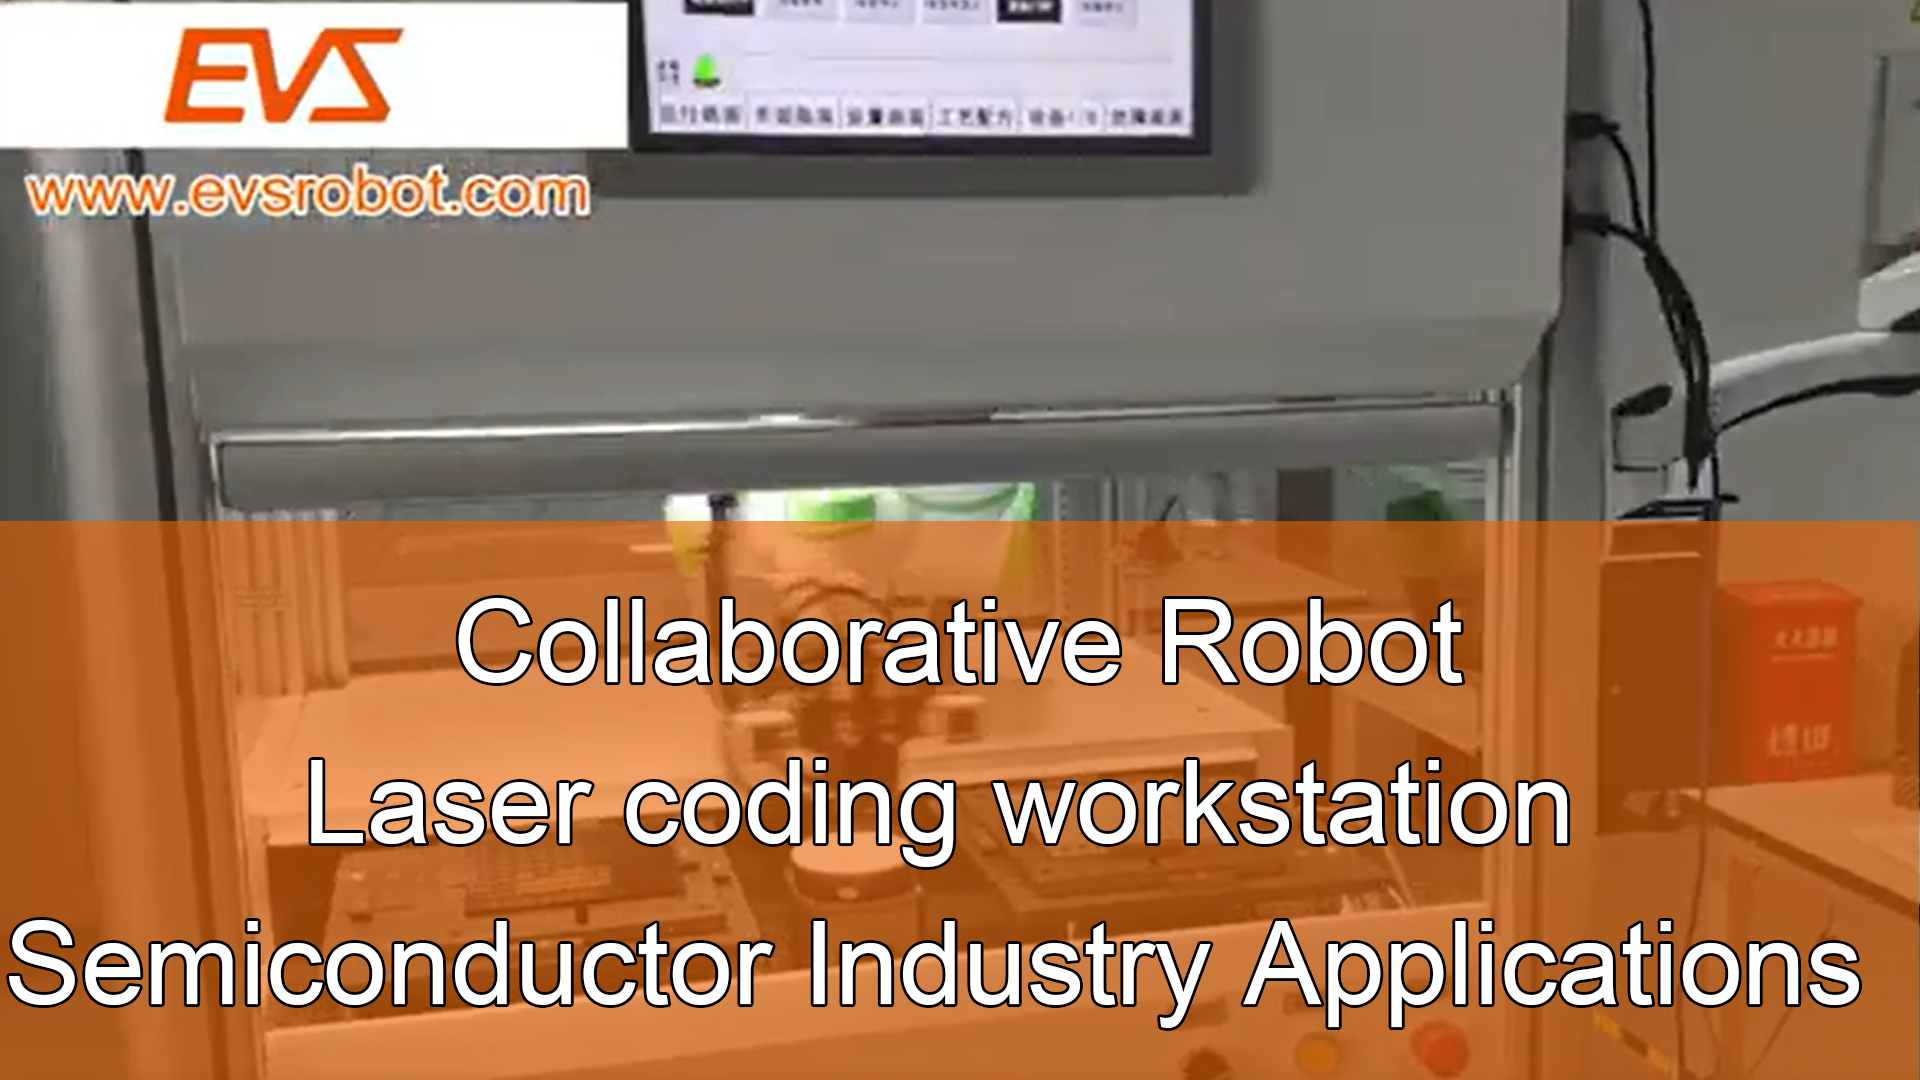 Collaborative robot/Laser coding workstation/Semiconductor Industry Applications